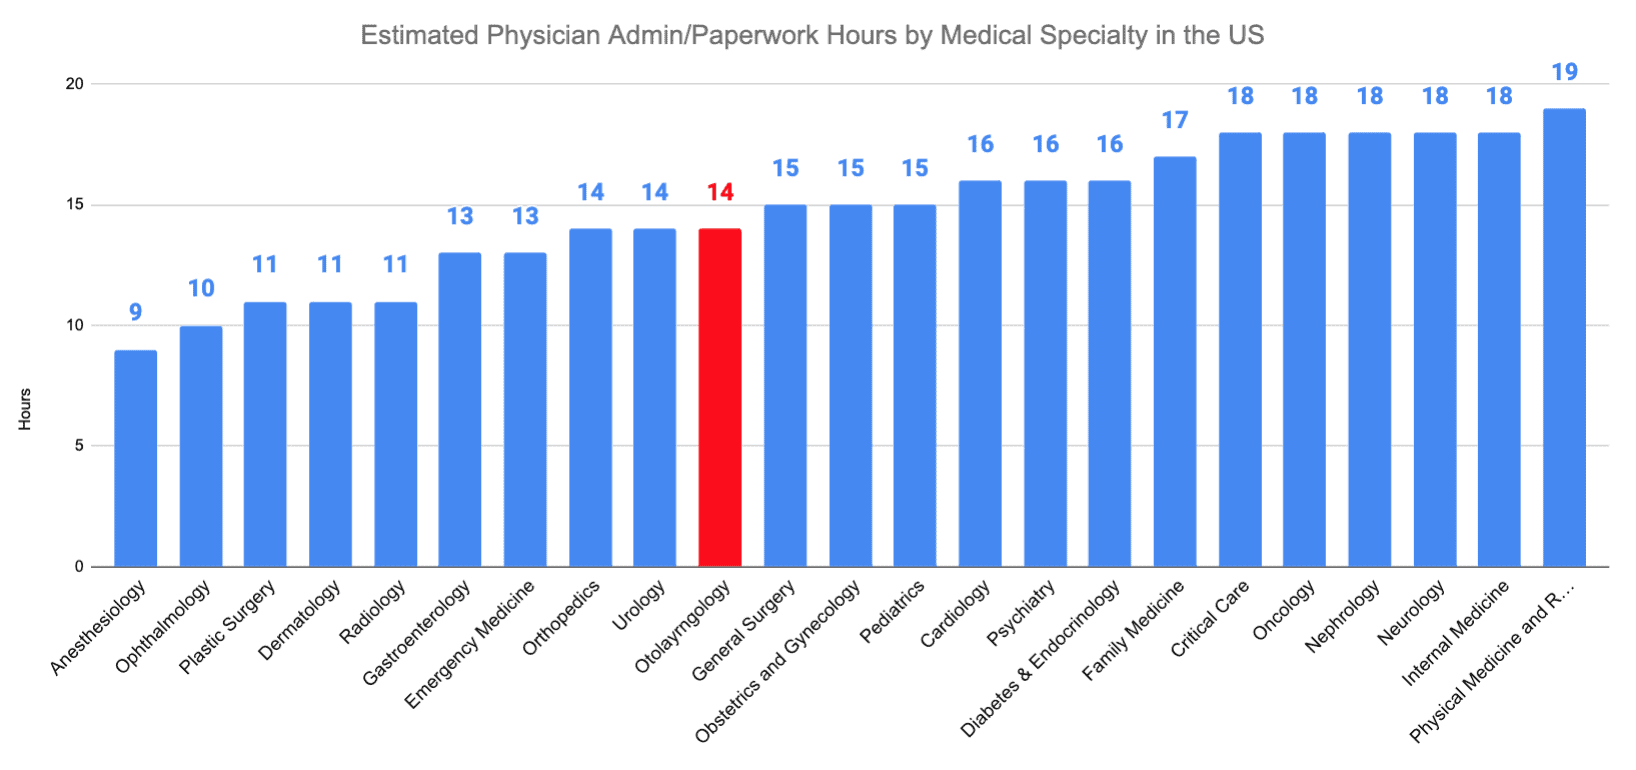 Otolaryngology vs. Infectious Disease Estimated Physician Admin/Paperwork Hours by Medical Specialty in the US